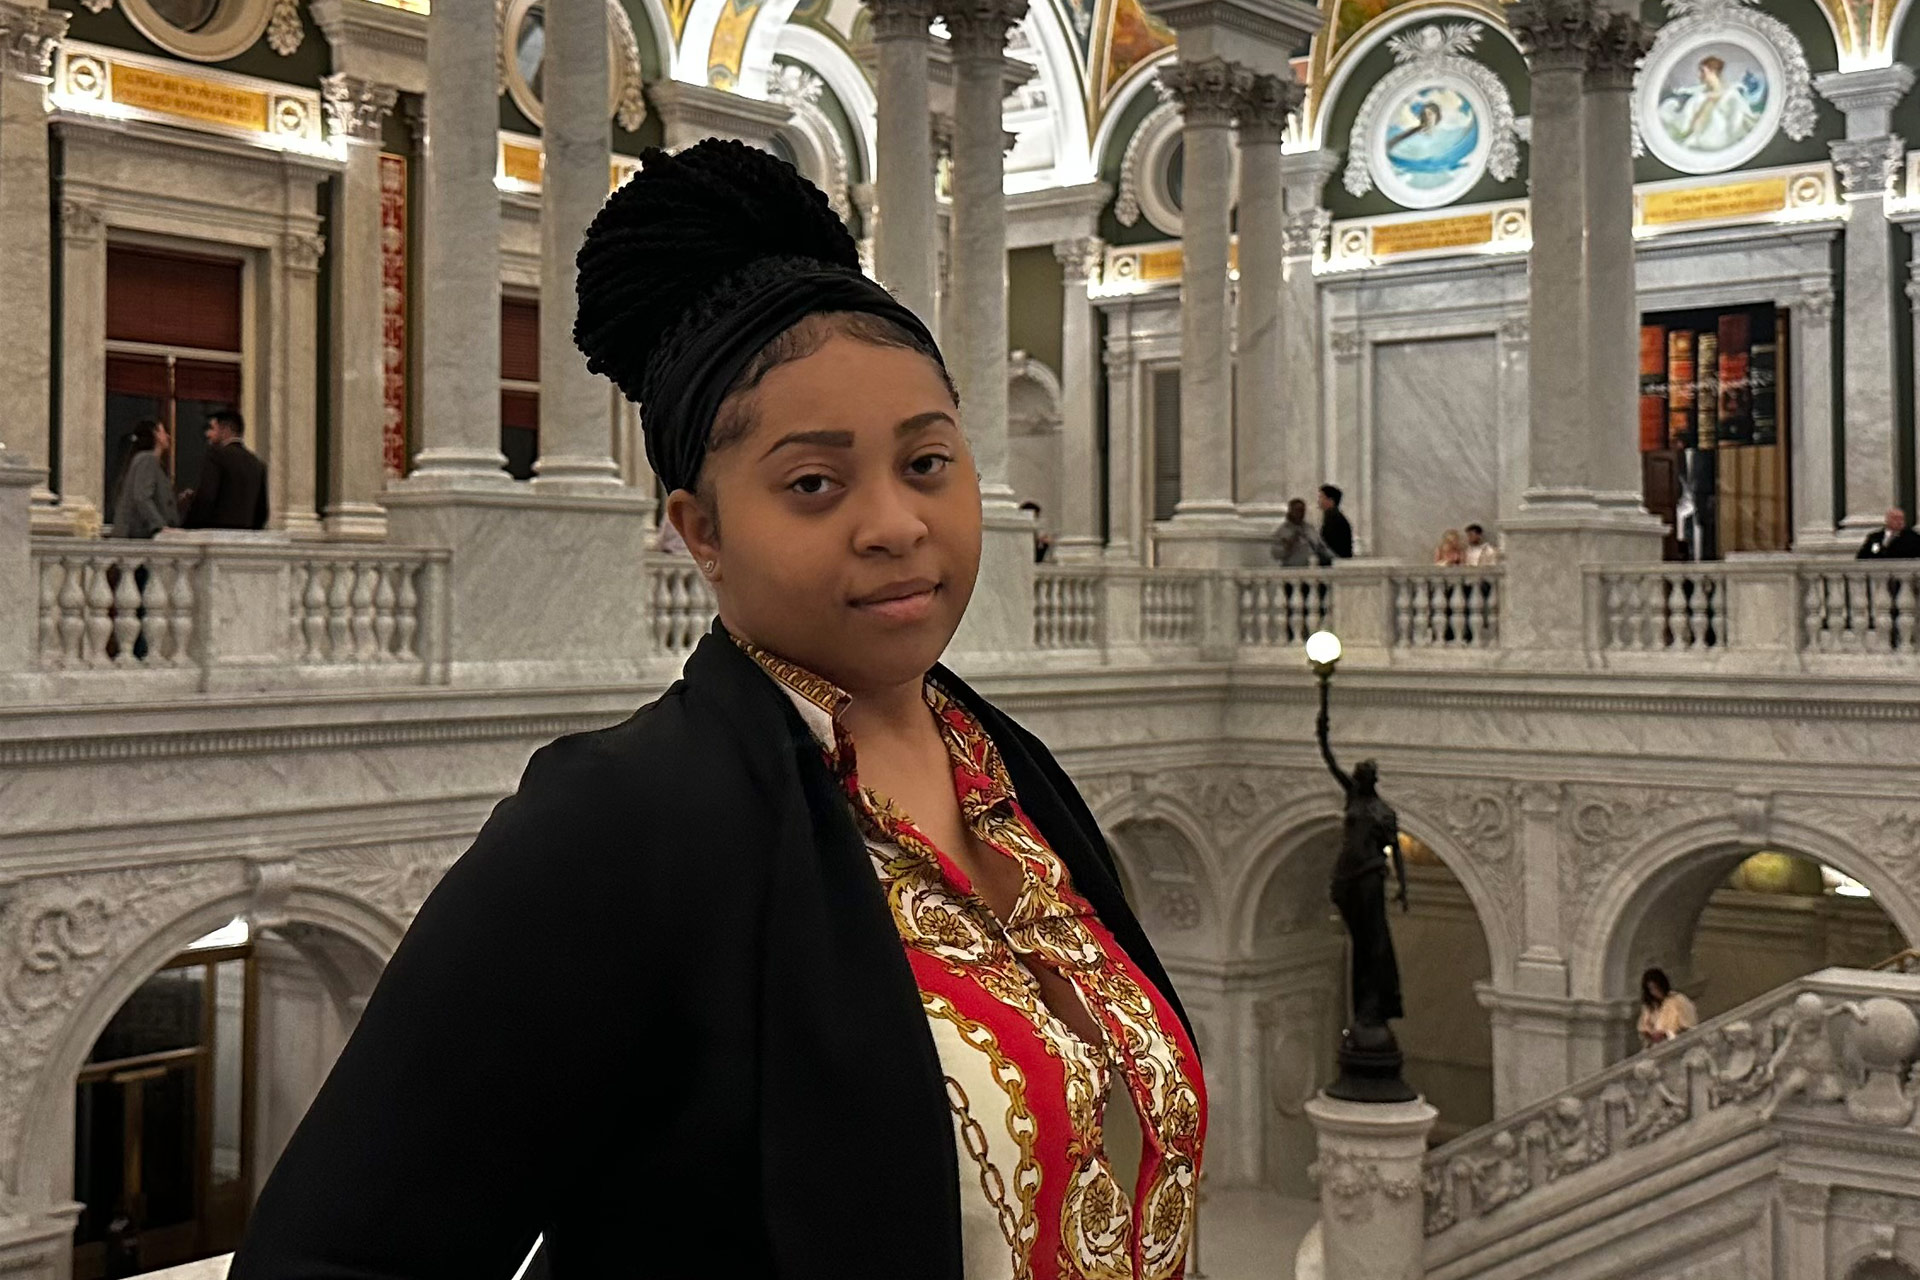 Janiya Pettus, a political science major at the University of Arkansas at Little Rock, undertook an internship journey with National Association of Federally Impacted Schools (NAFIS).